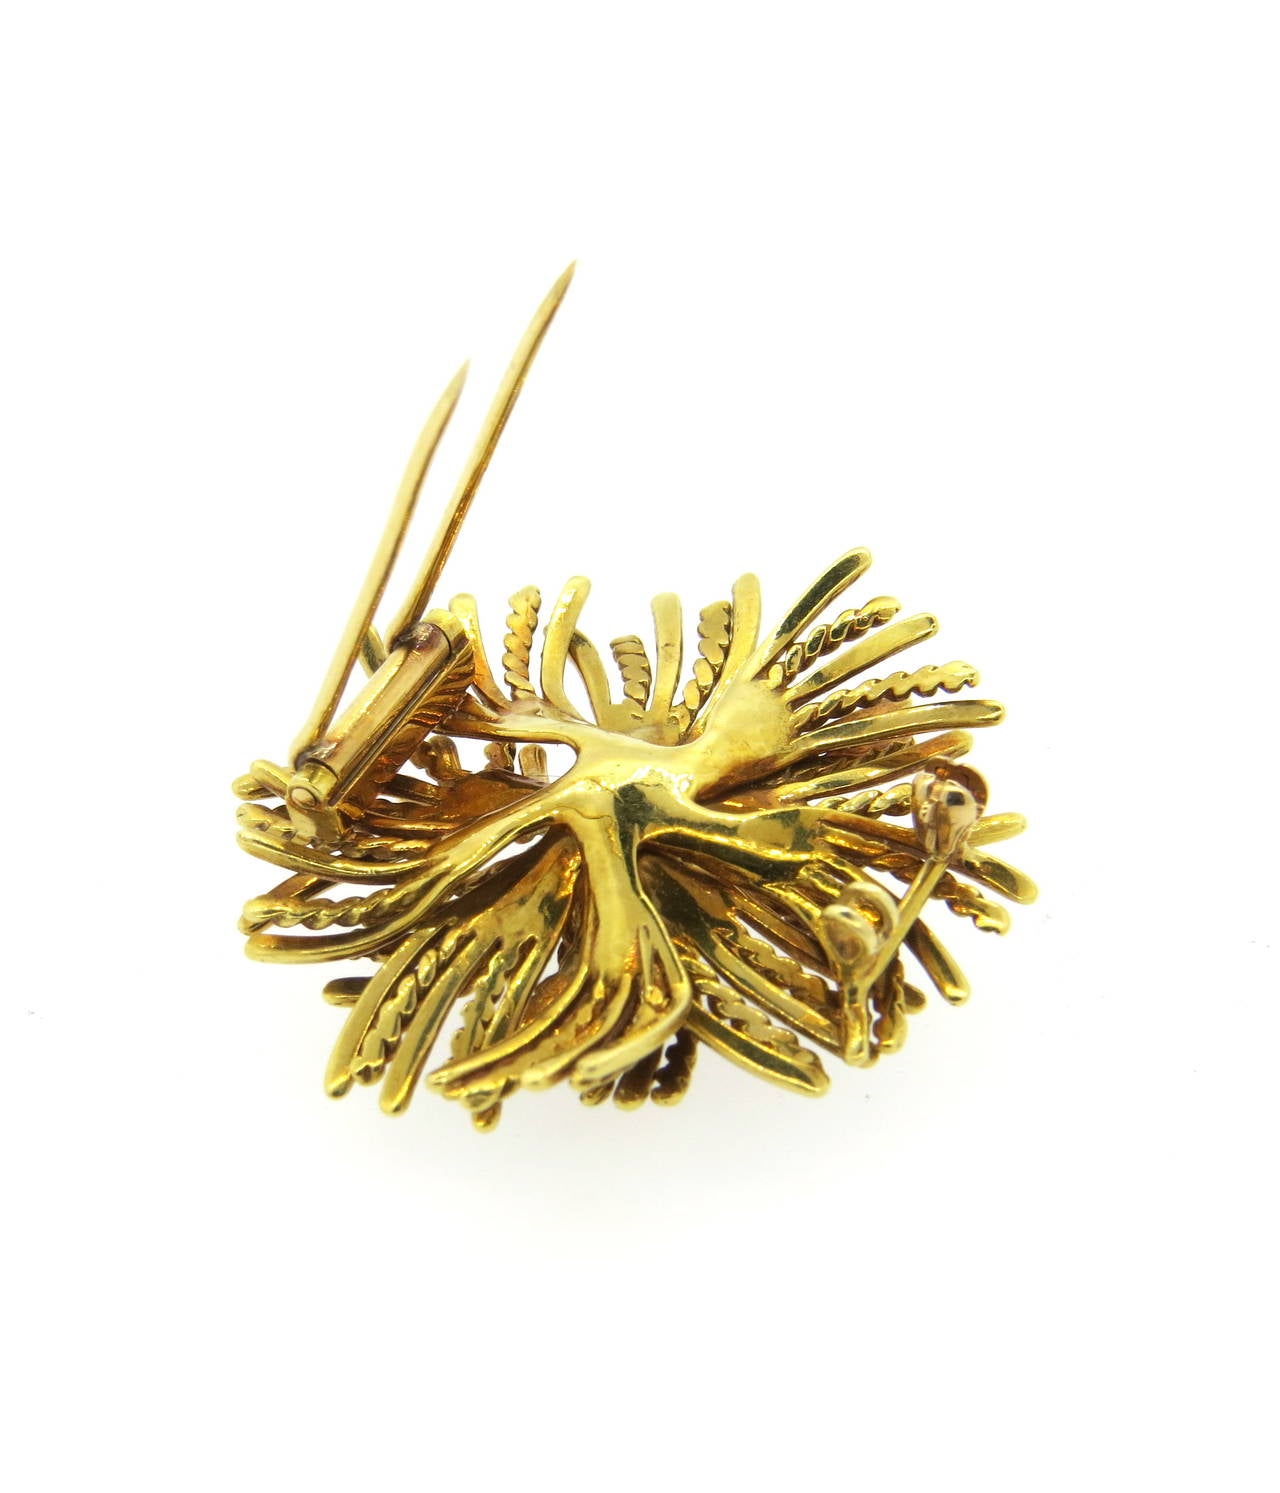 18k yellow gold anemone brooch, crafted by Tiffany & Co. Measuring 40mm x 40mm. Marked Tiffany & Co,18k. Weight of the piece - 22.2 grams